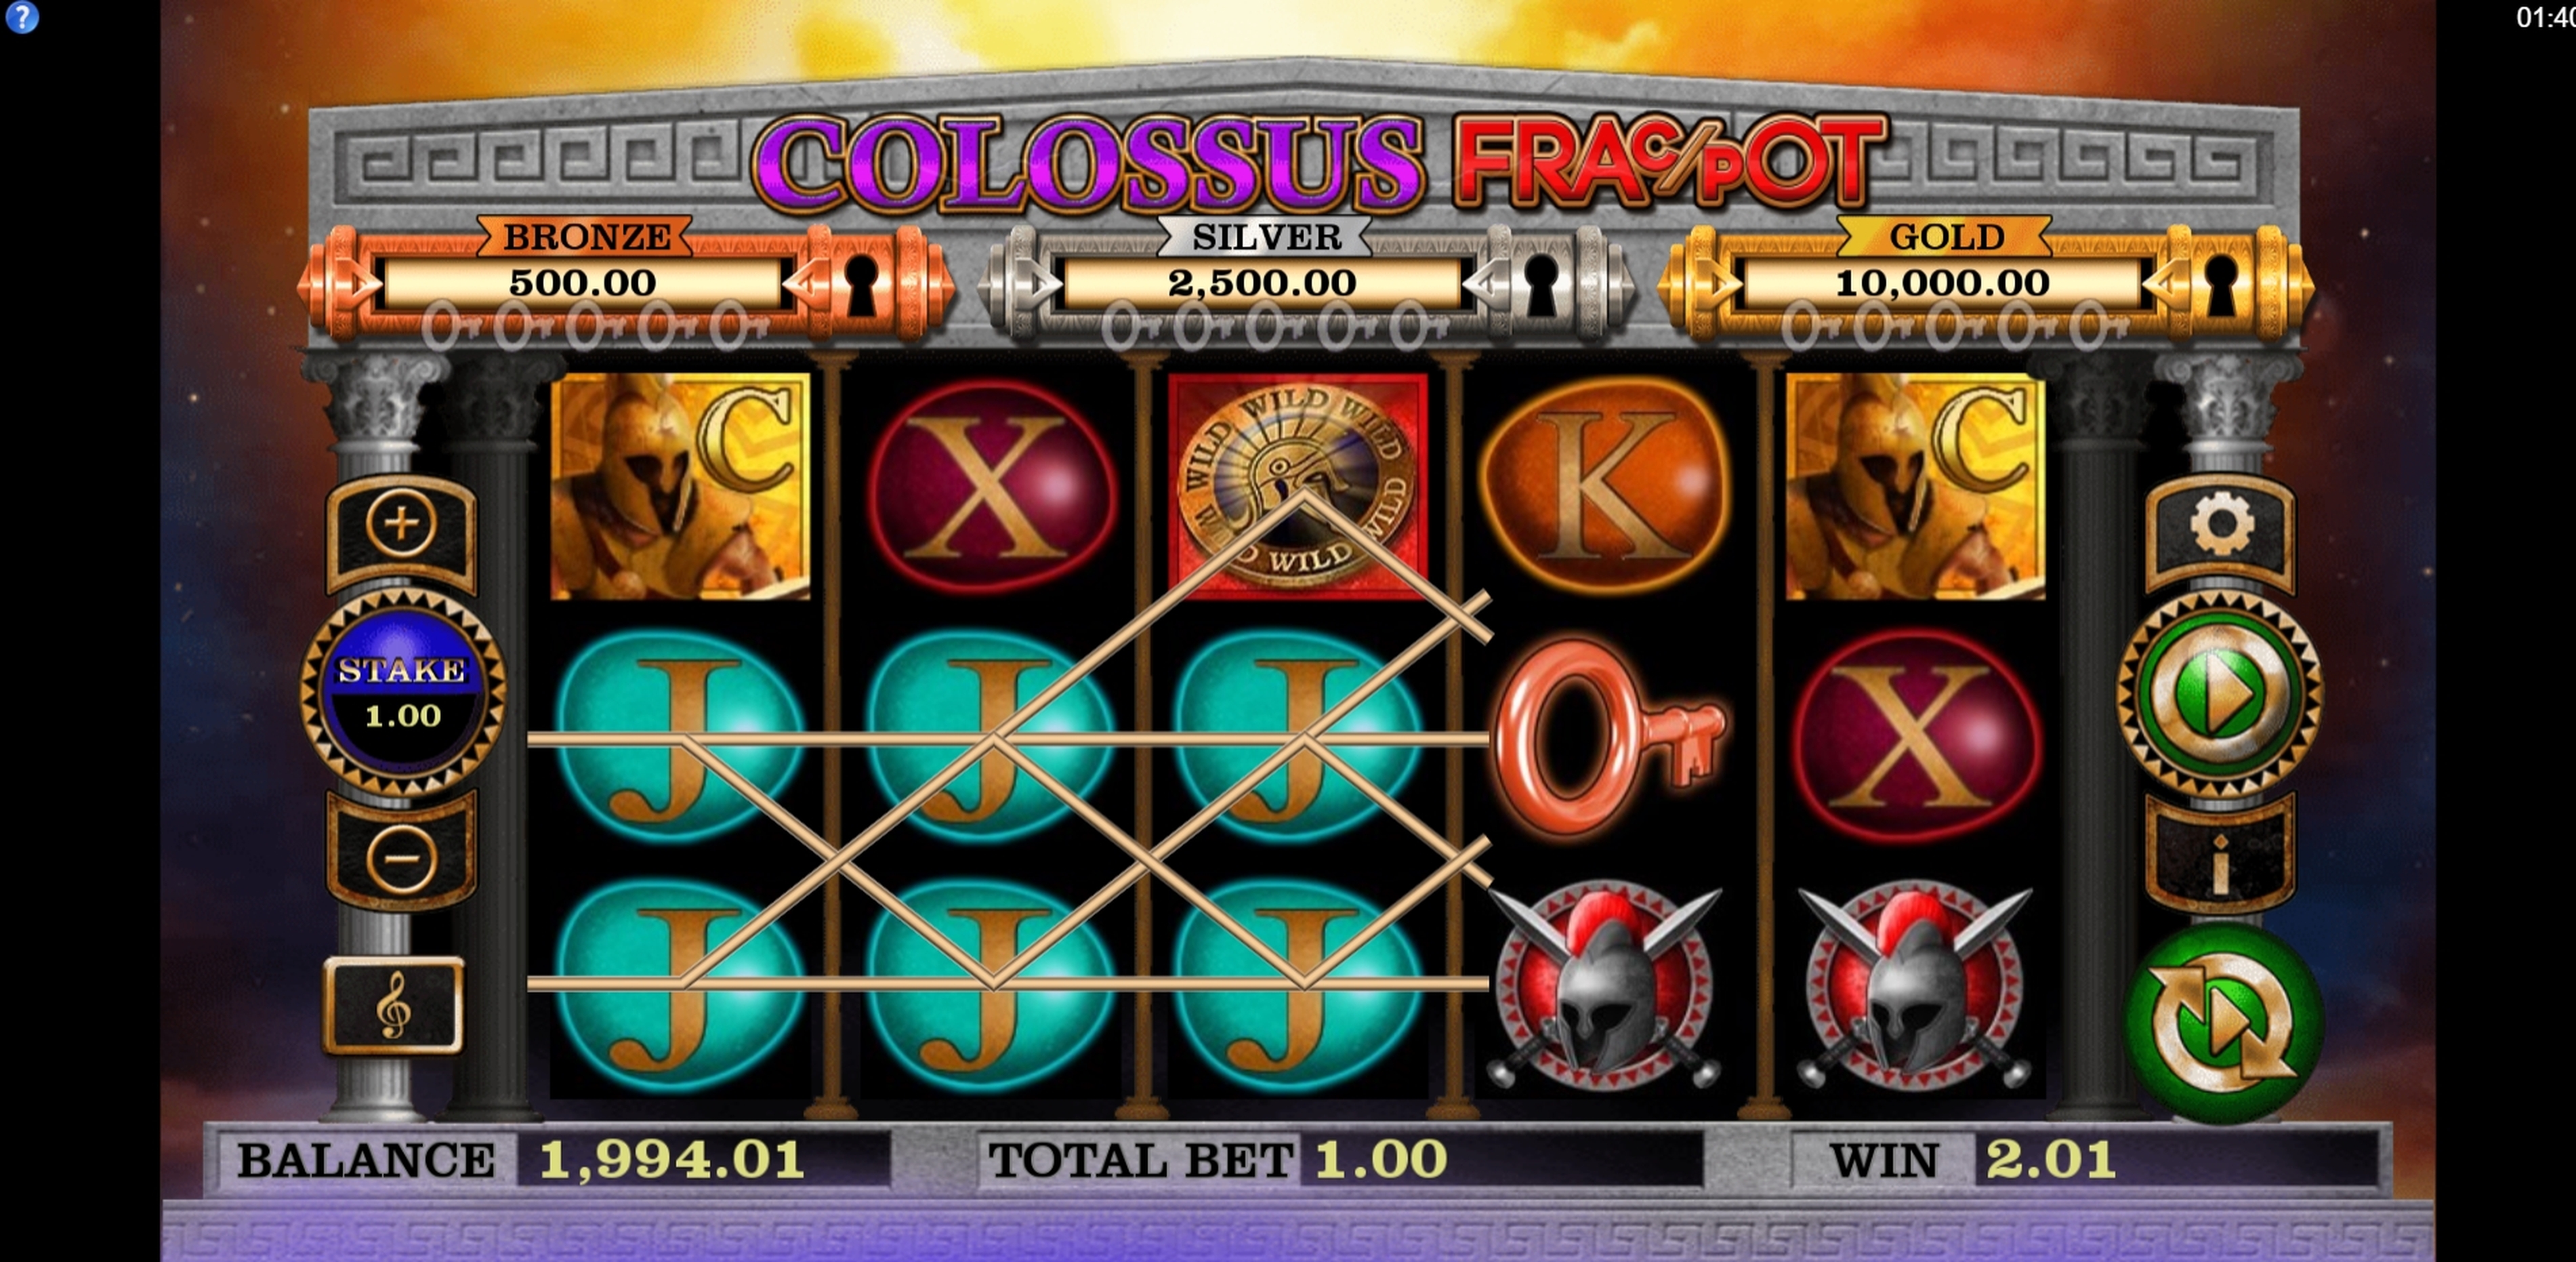 Win Money in Colossus Fracpot Free Slot Game by CORE Gaming